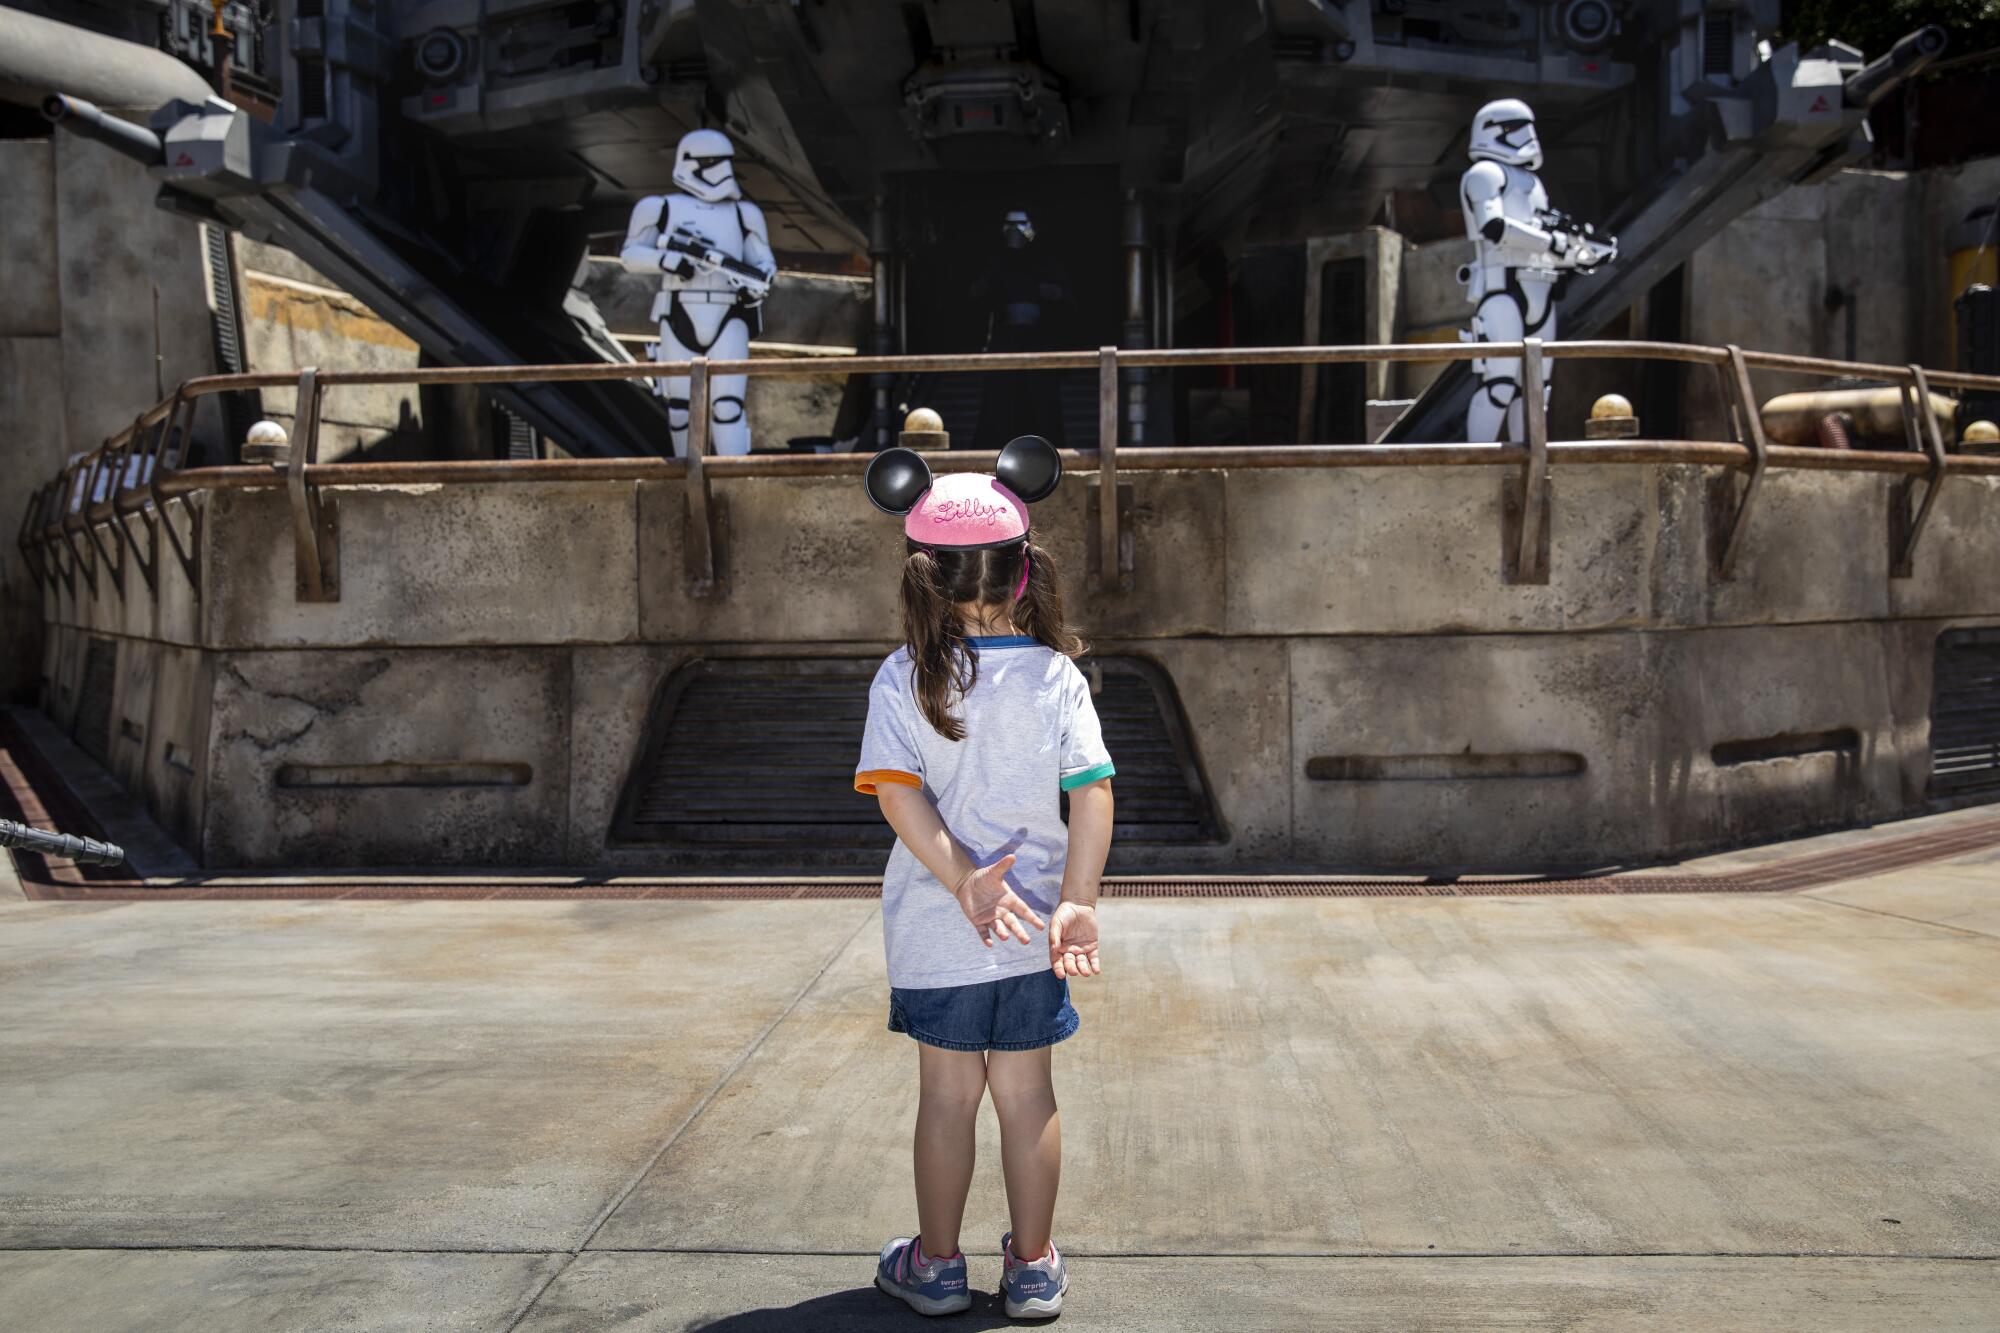 A girl in mouse ears watches two stormtrooper characters behind a railing.